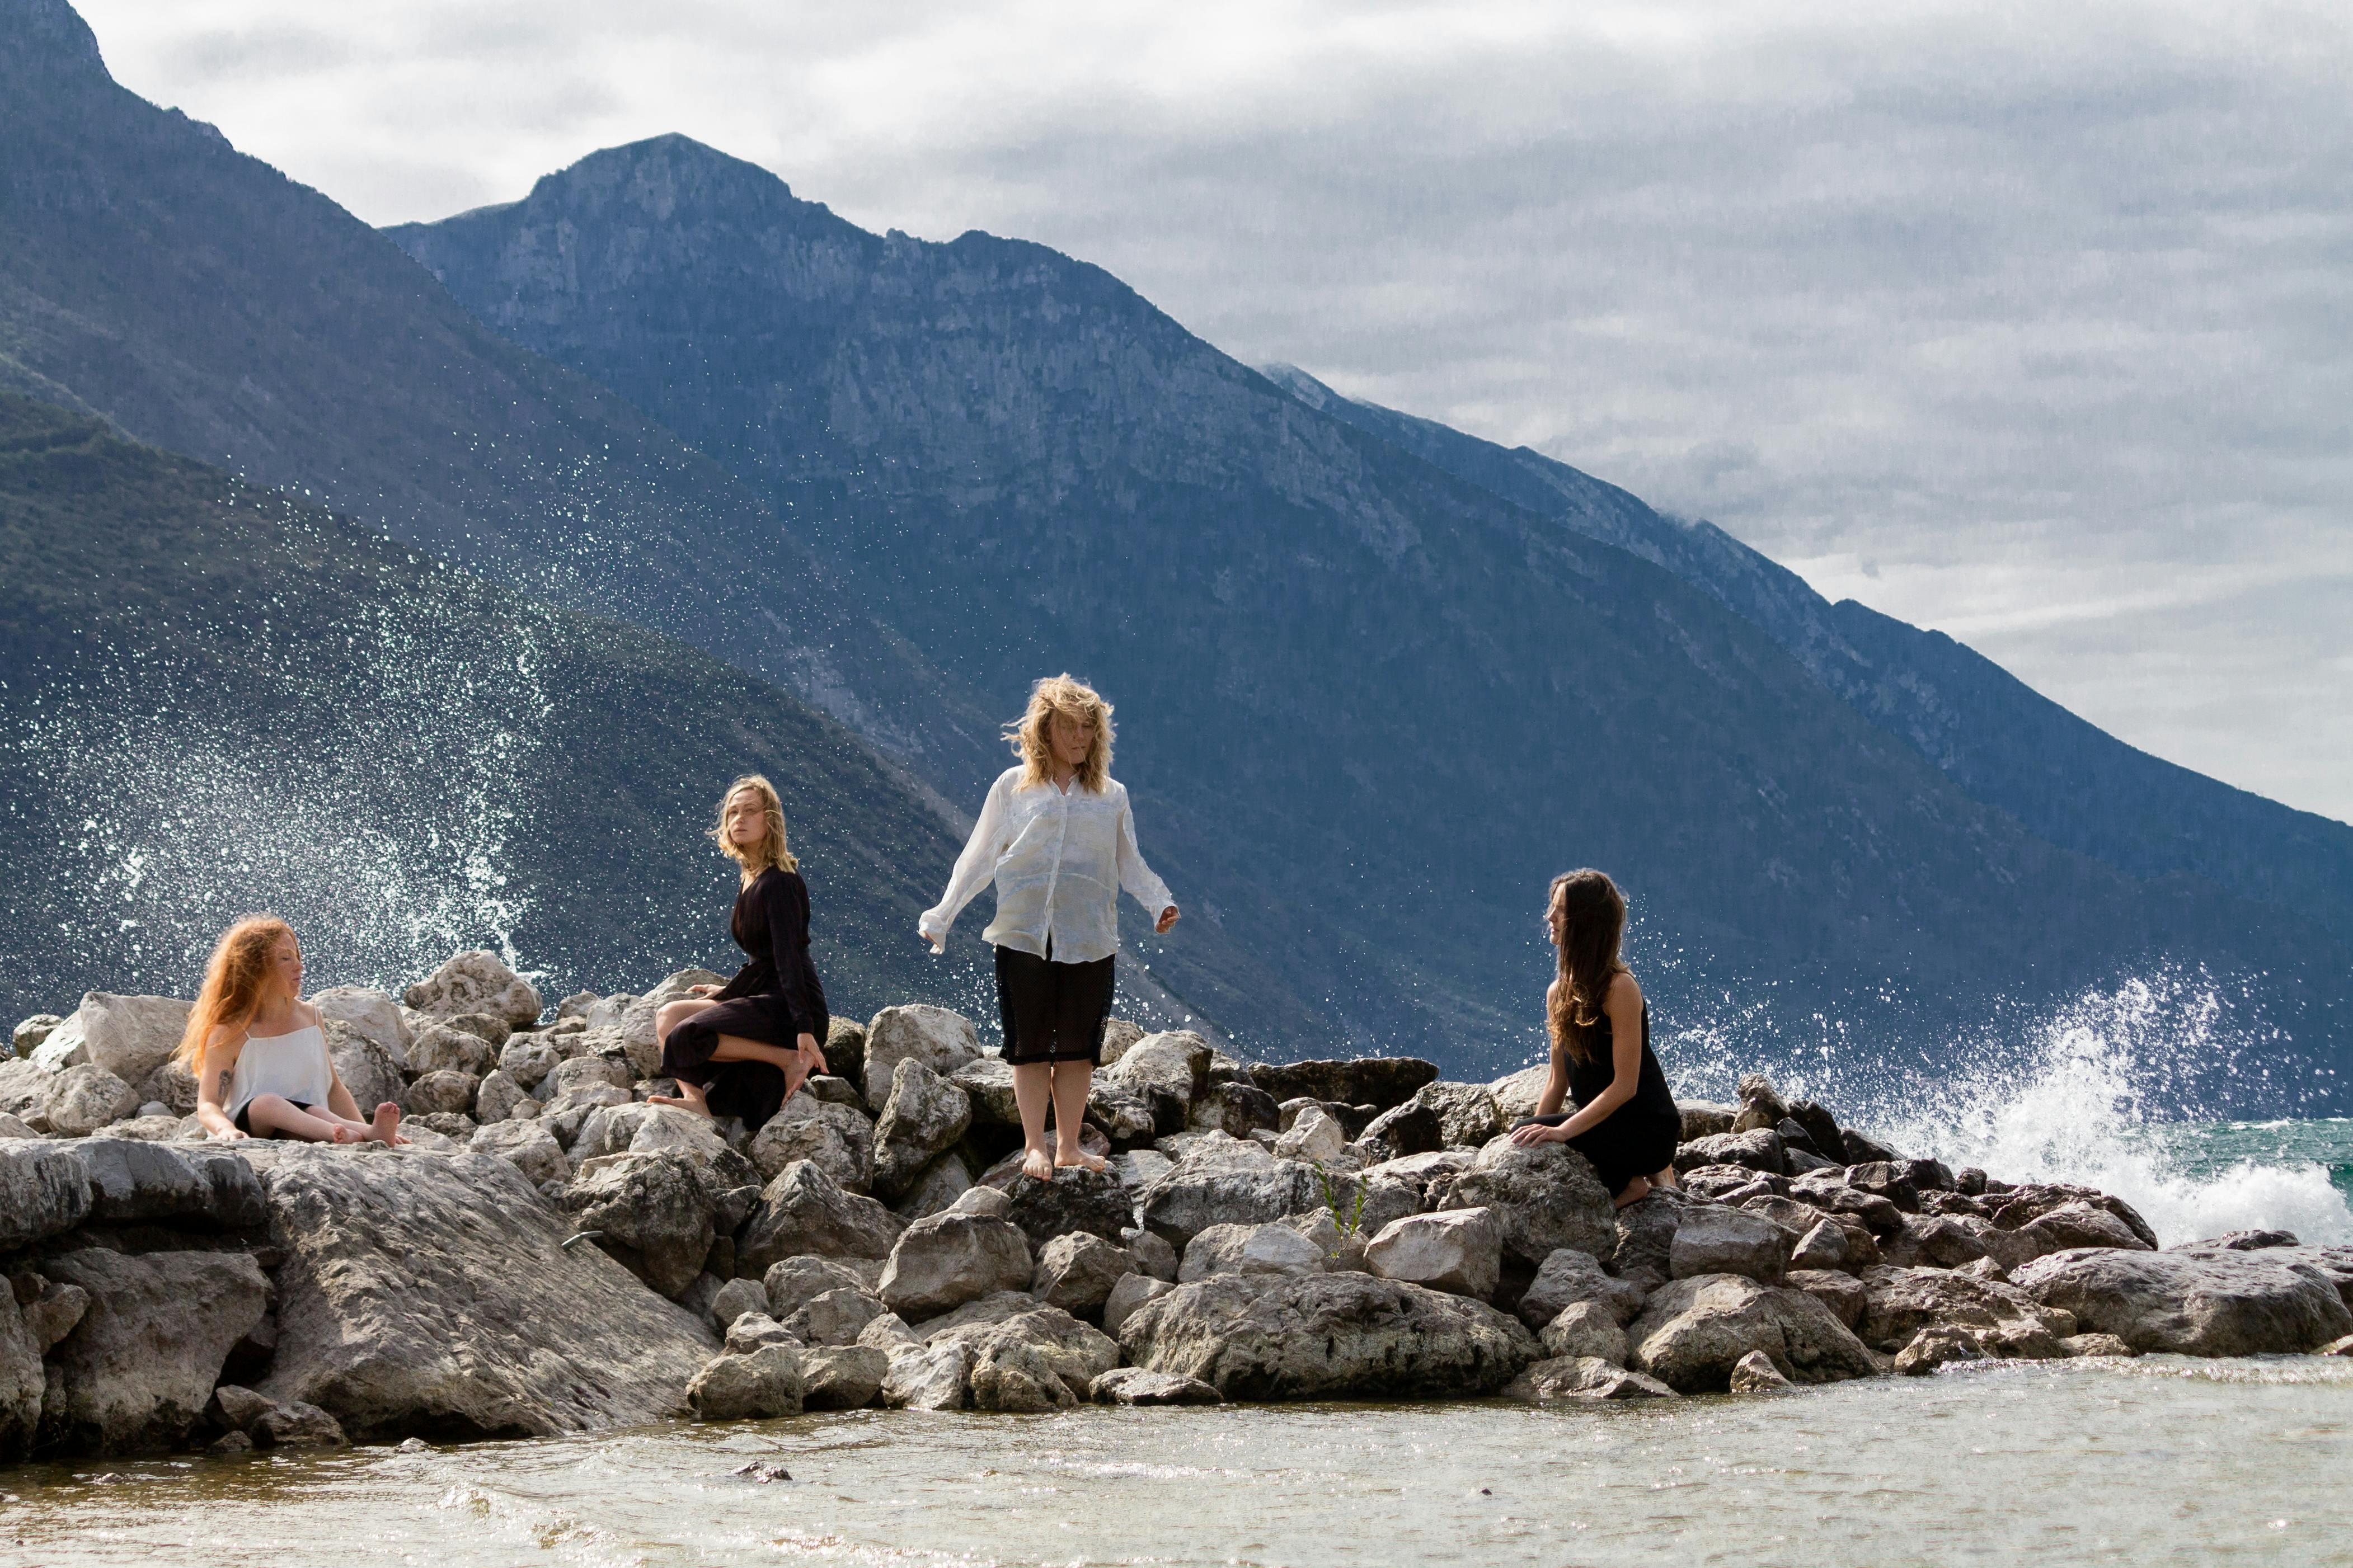 Cliffs can be seen on a water surface; mountains in the background.  Four women are standing or sitting on the rocks, standing still and waiting. Splashes of water frame their figures.